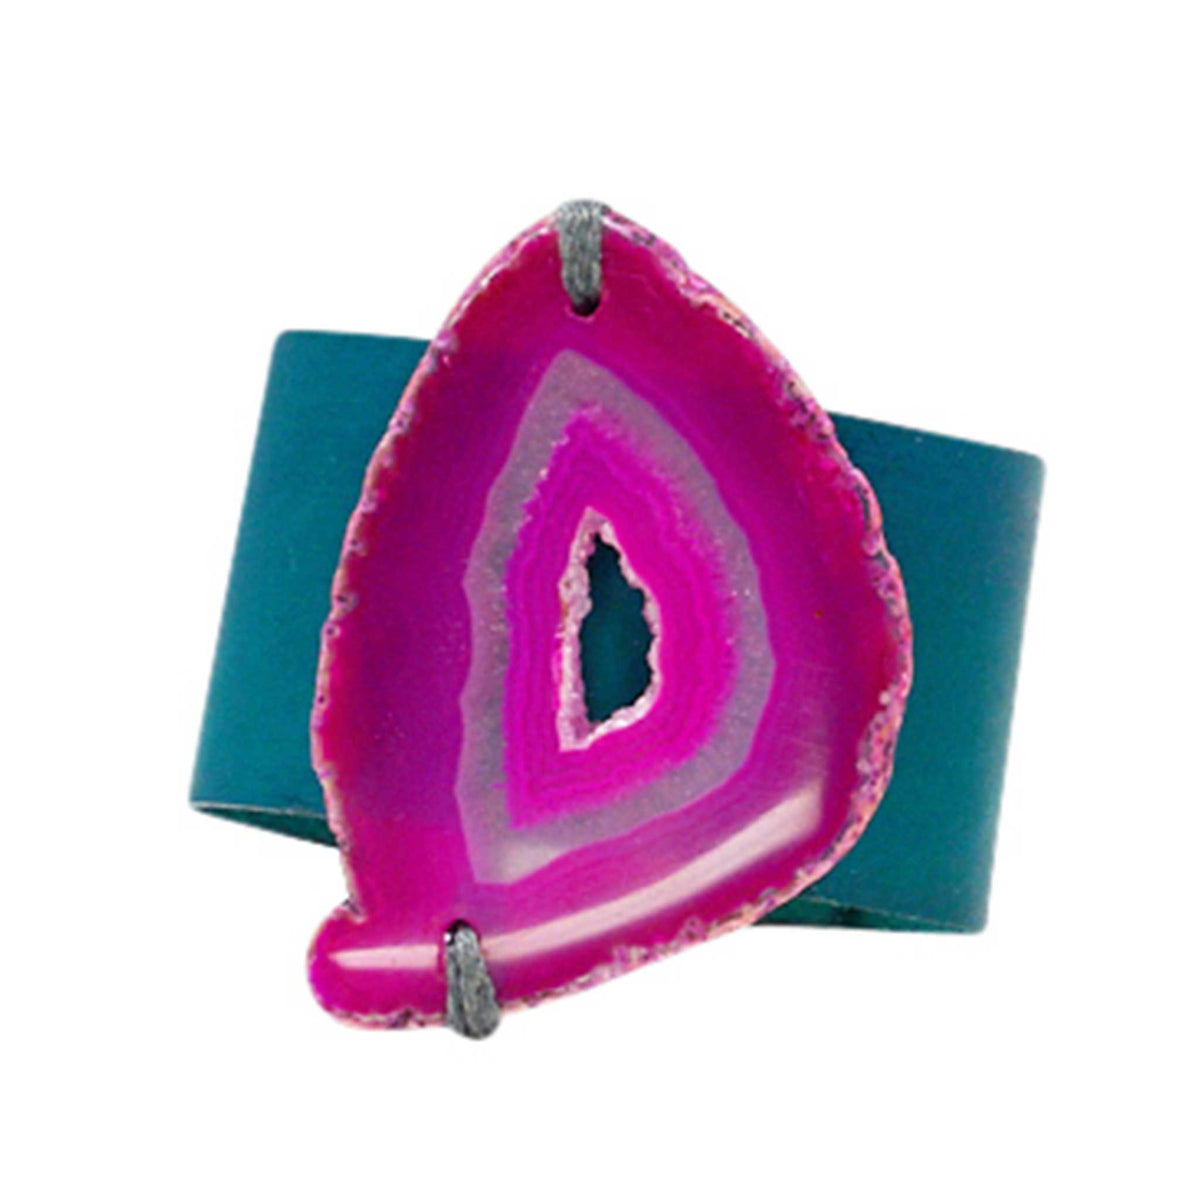 HANDCRAFTED CUFF - TEAL LEATHER WITH PINK AGATE - 4CMTEPI1.1